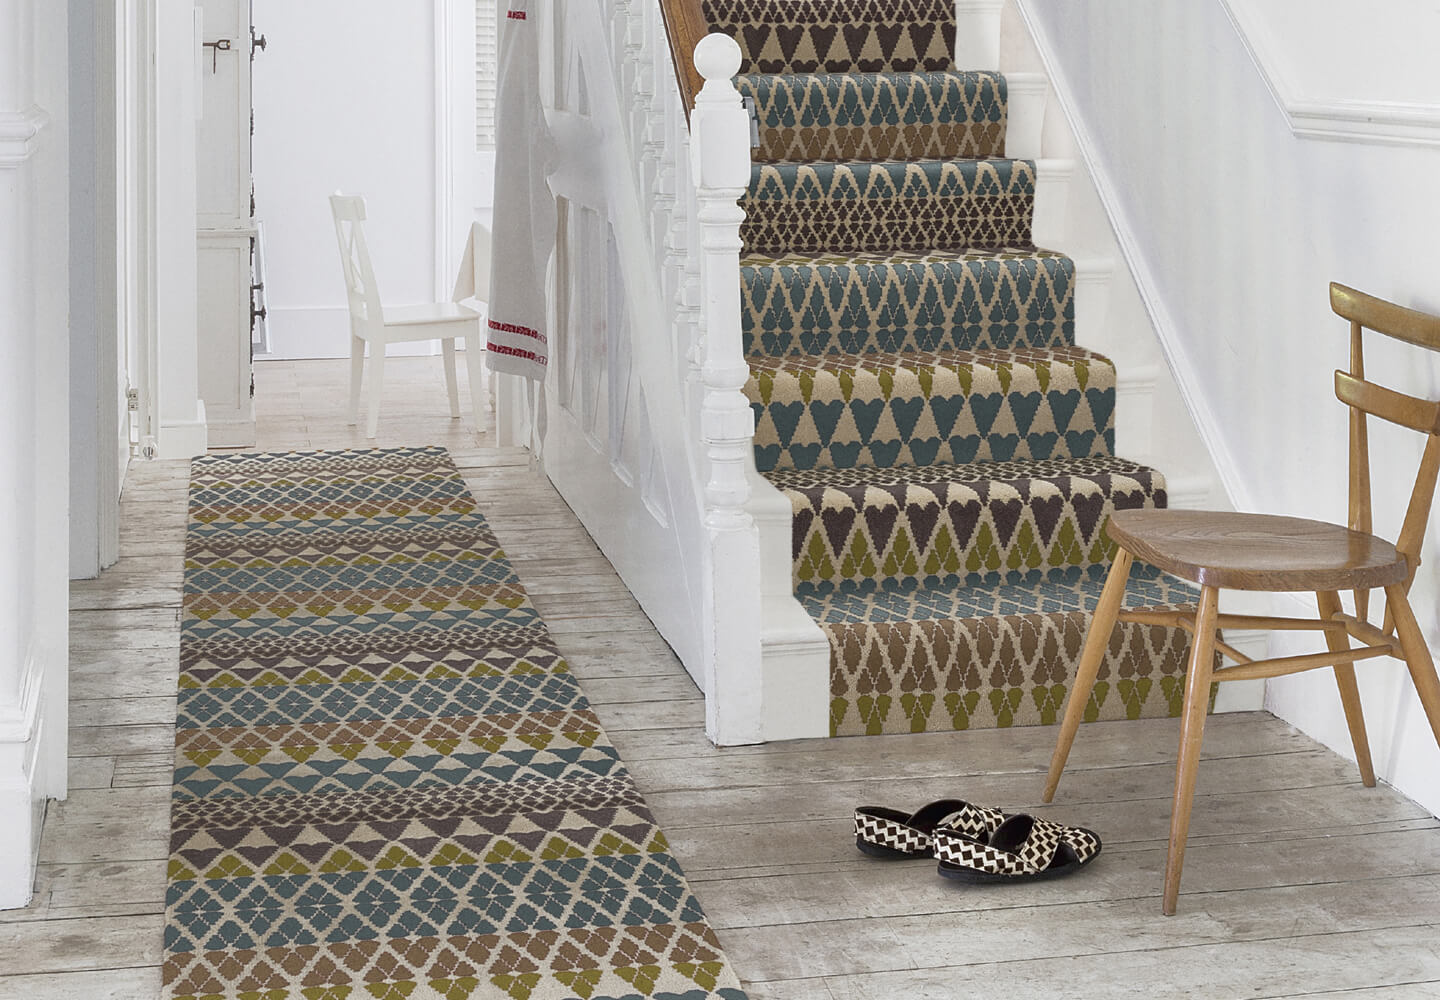 Quirky Fair Isle Annie British Patterned Carpet designed by Margo Selby